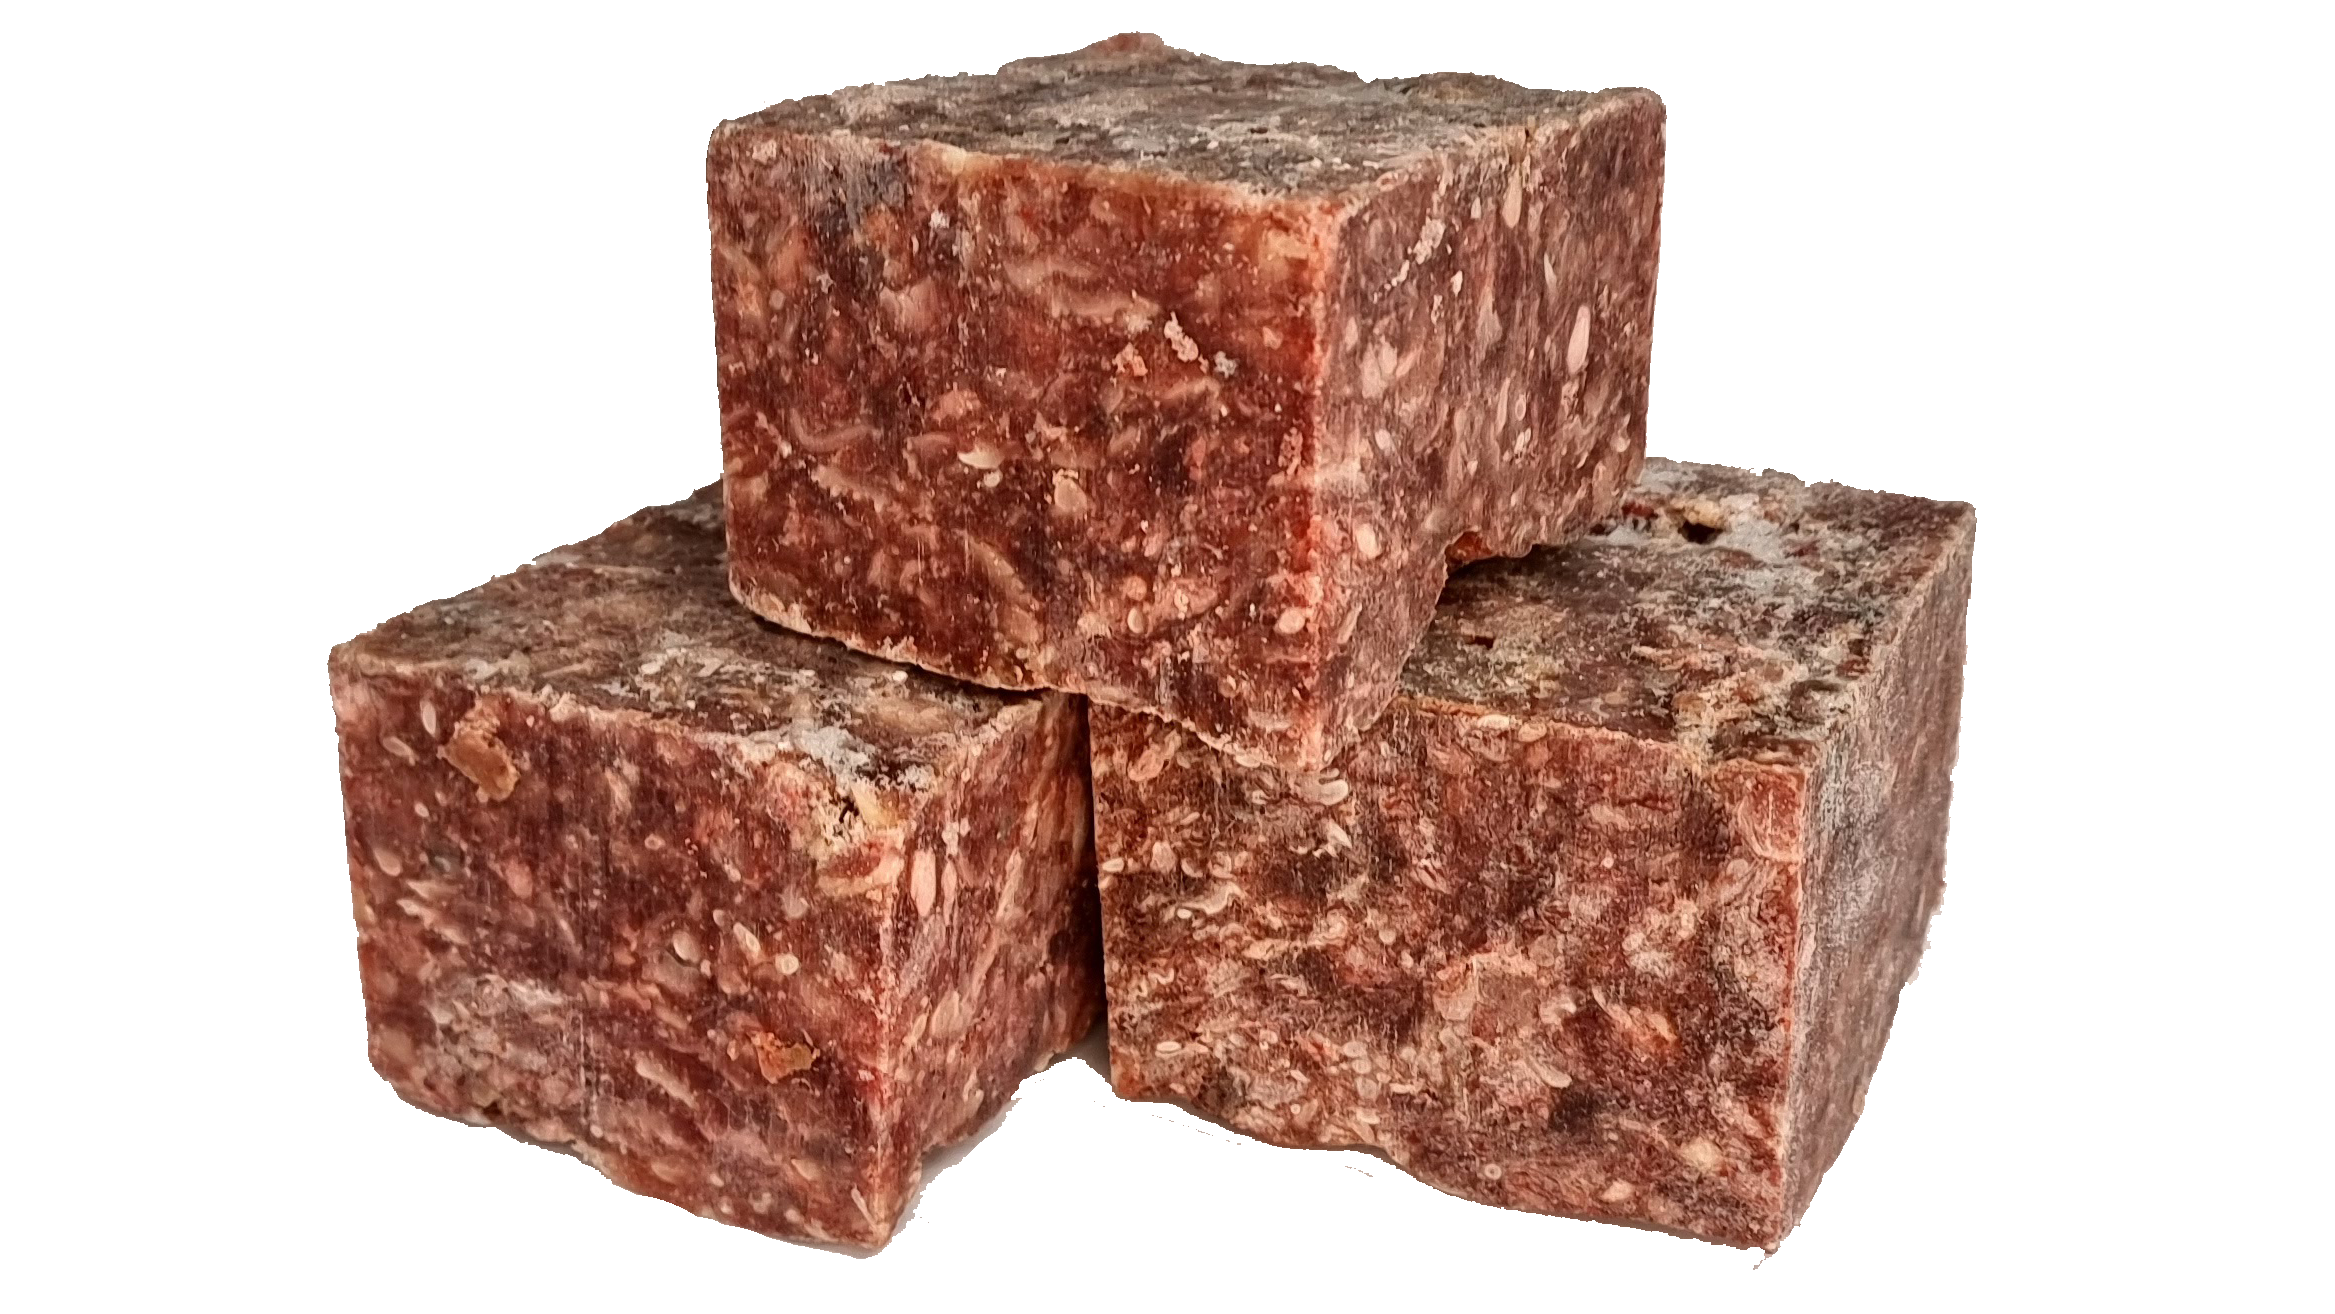 Pure Beef (boneless) 5Kg (11lb) 10 x approx 500g blocks suitable for cats